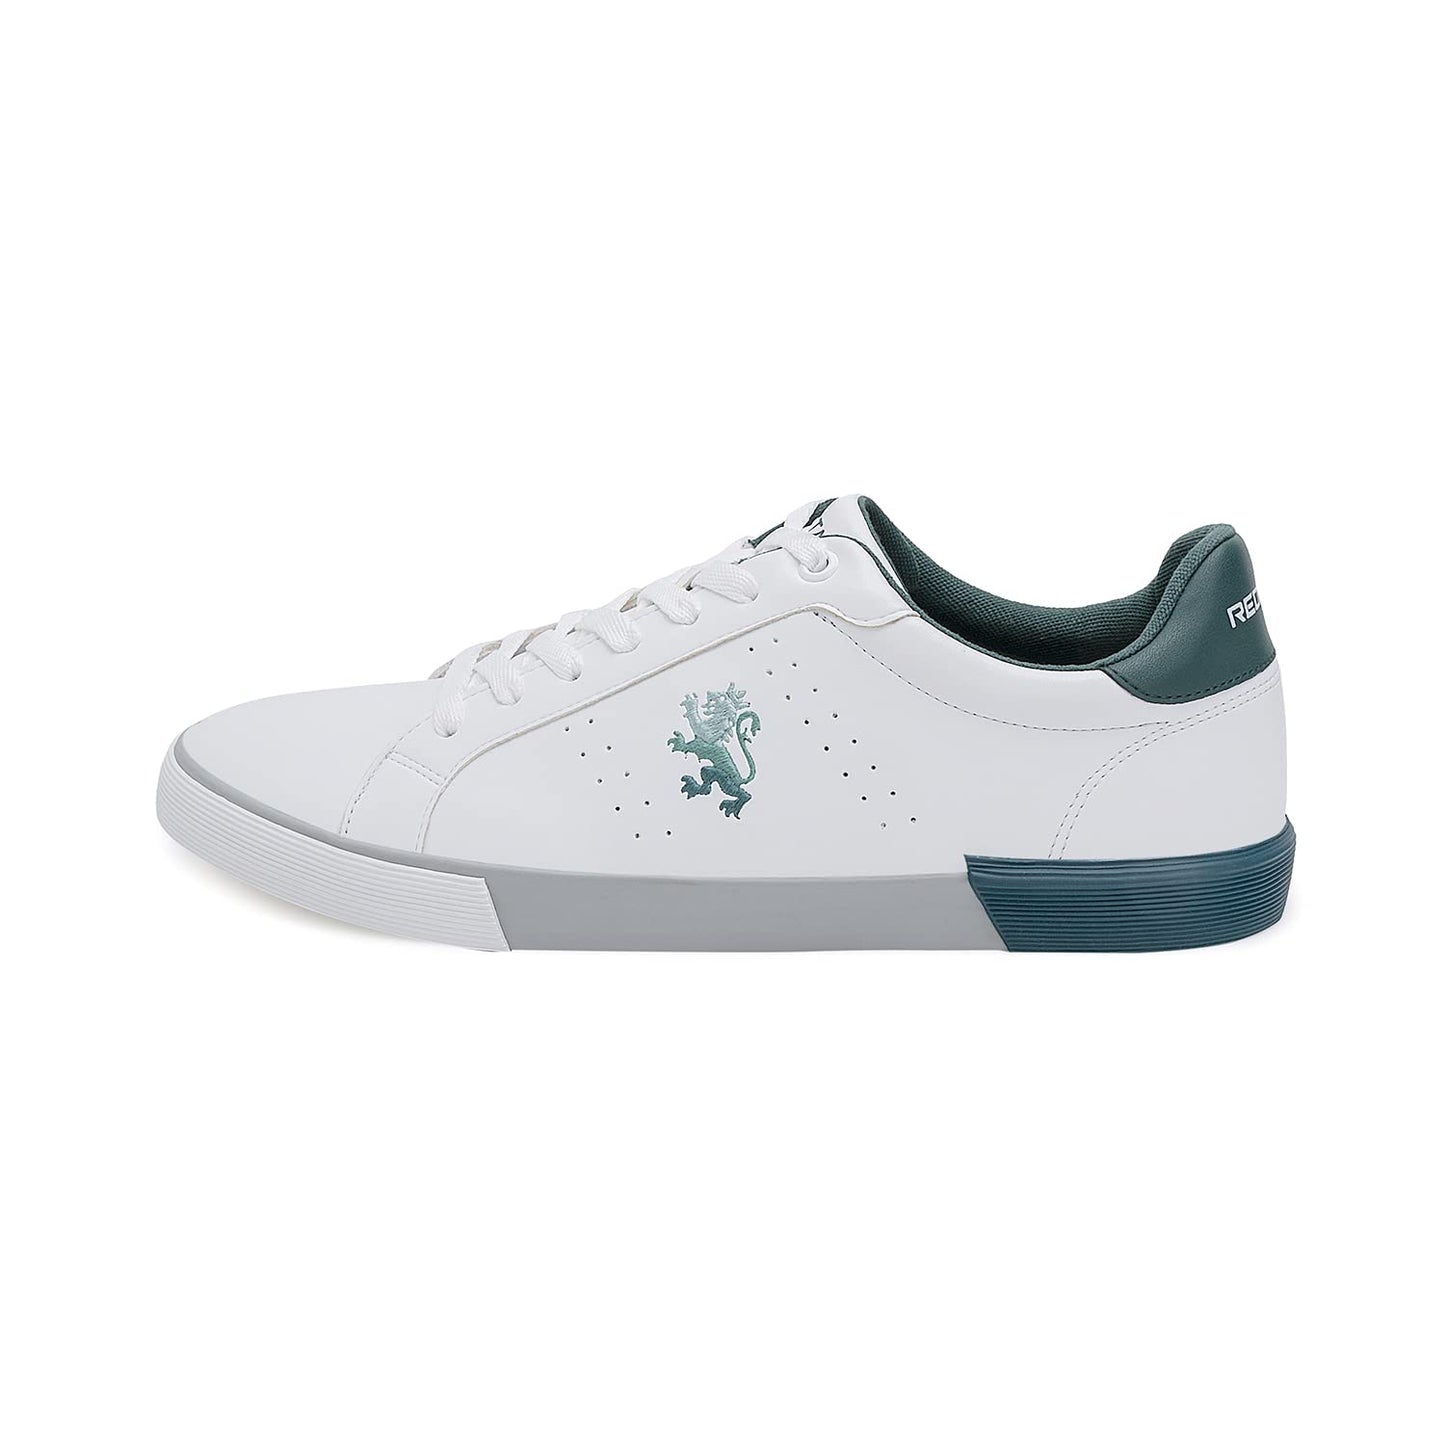 Red Tape Mens White/Teal Sneakers